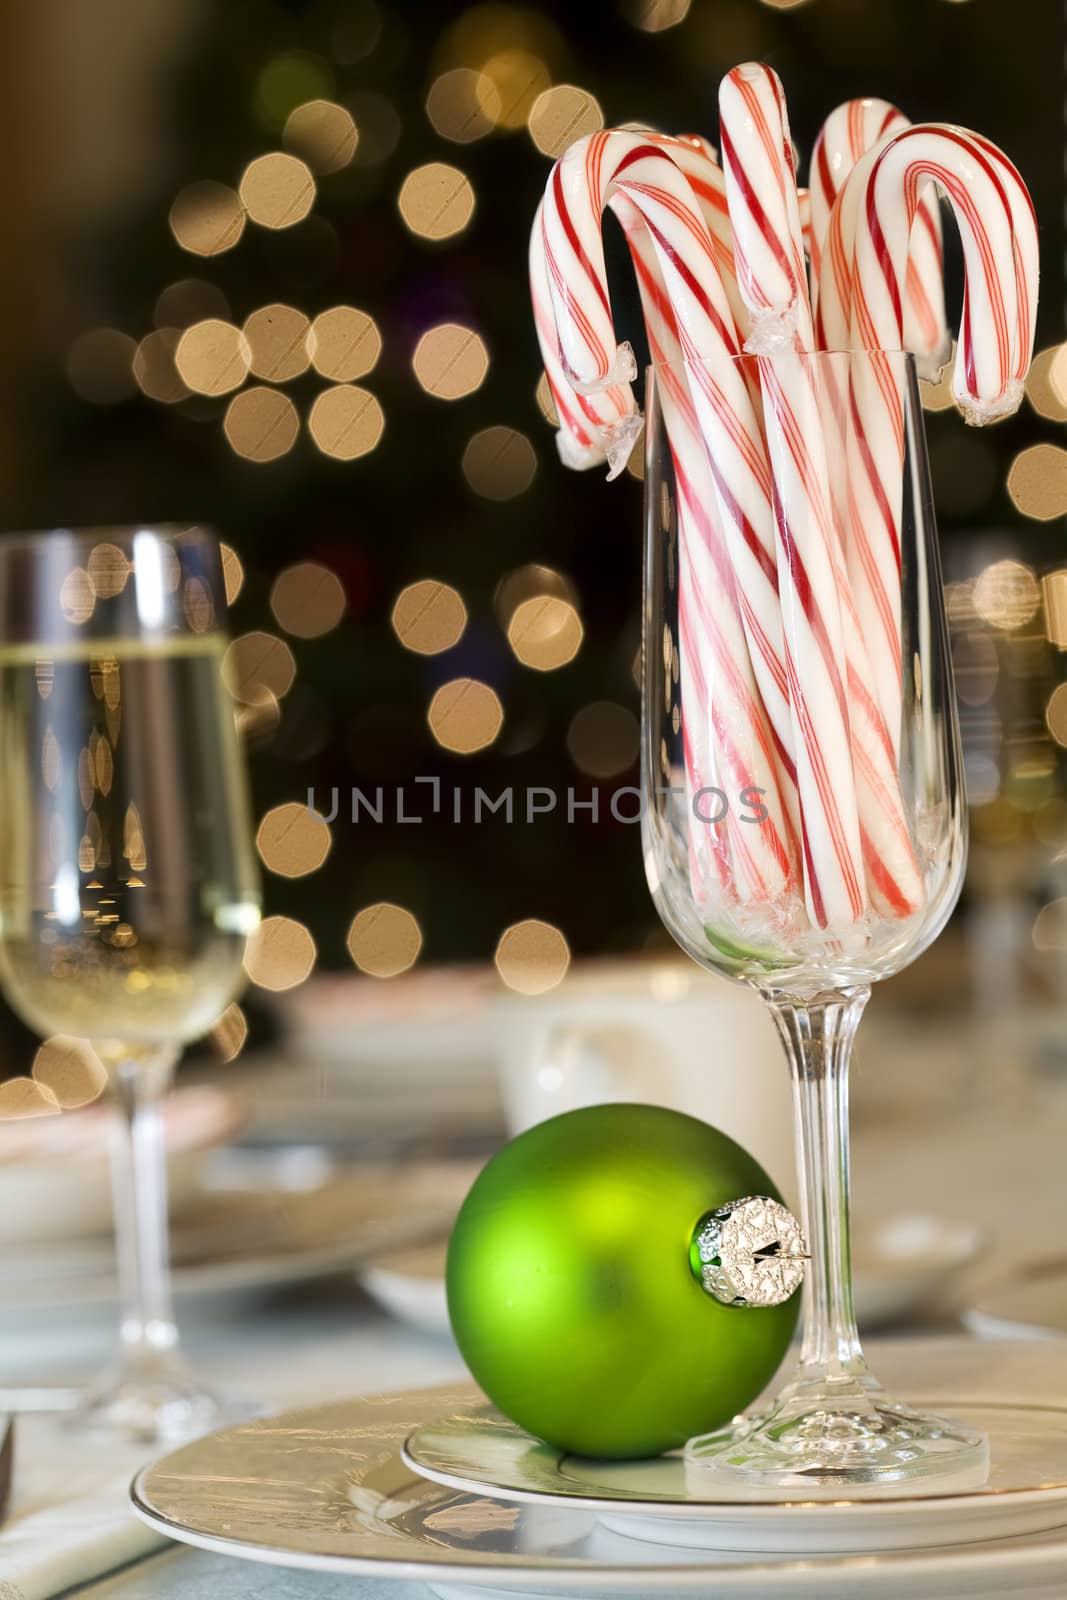 Candy canes and ornaments as Christmas table decorations by jarenwicklund